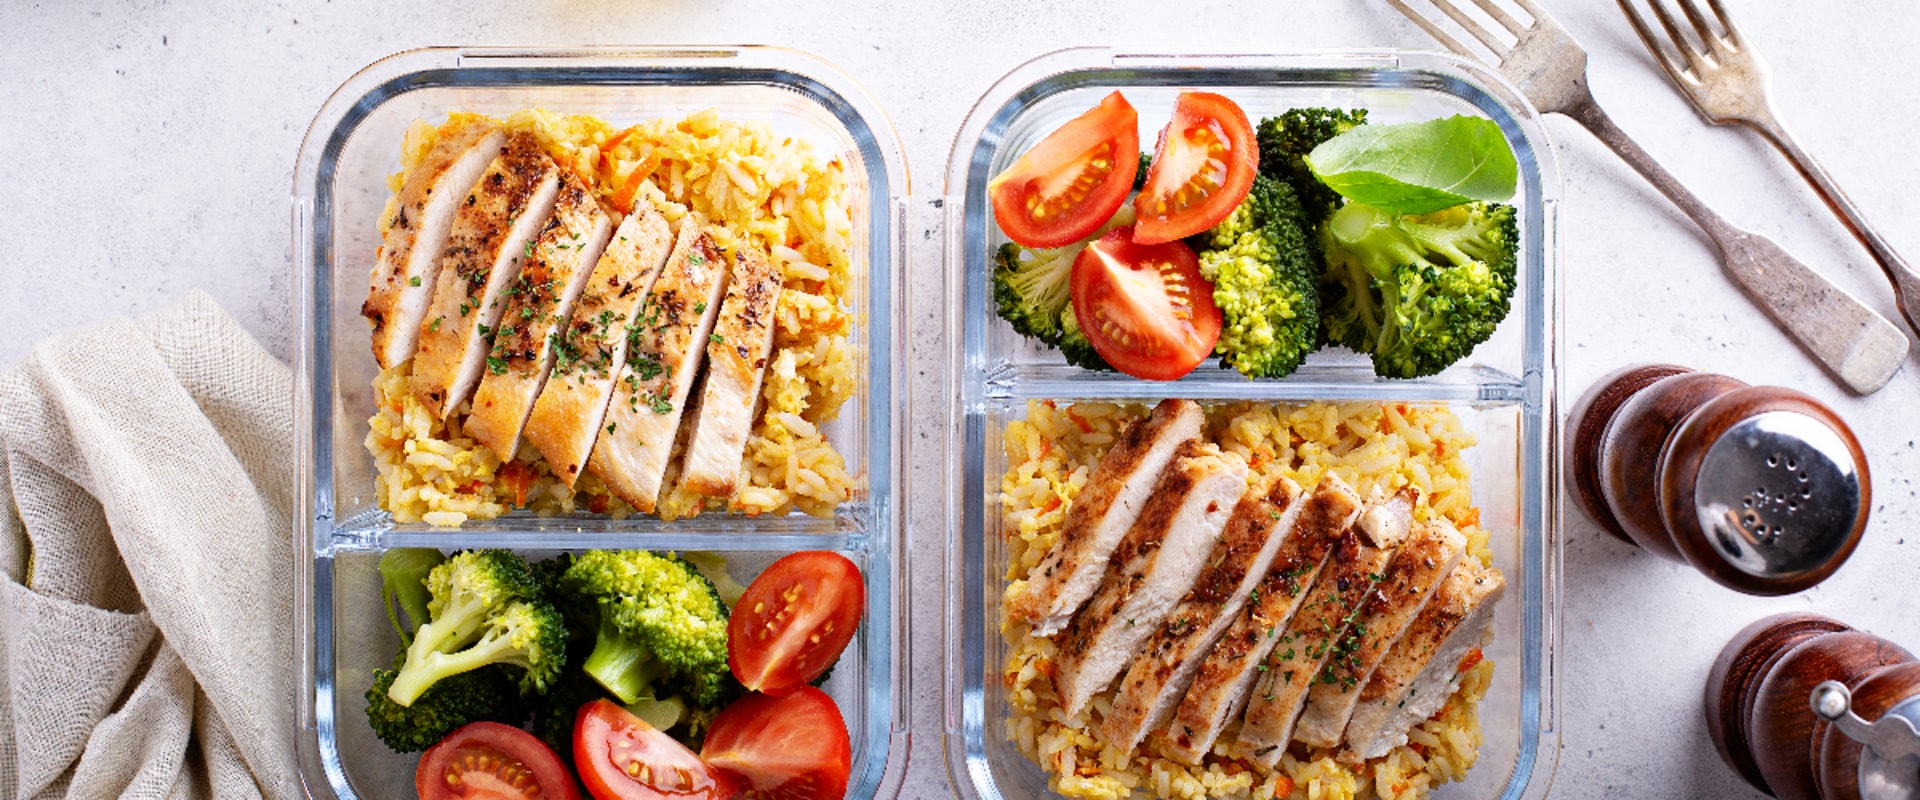 How to Plan Healthy Meals on a Budget